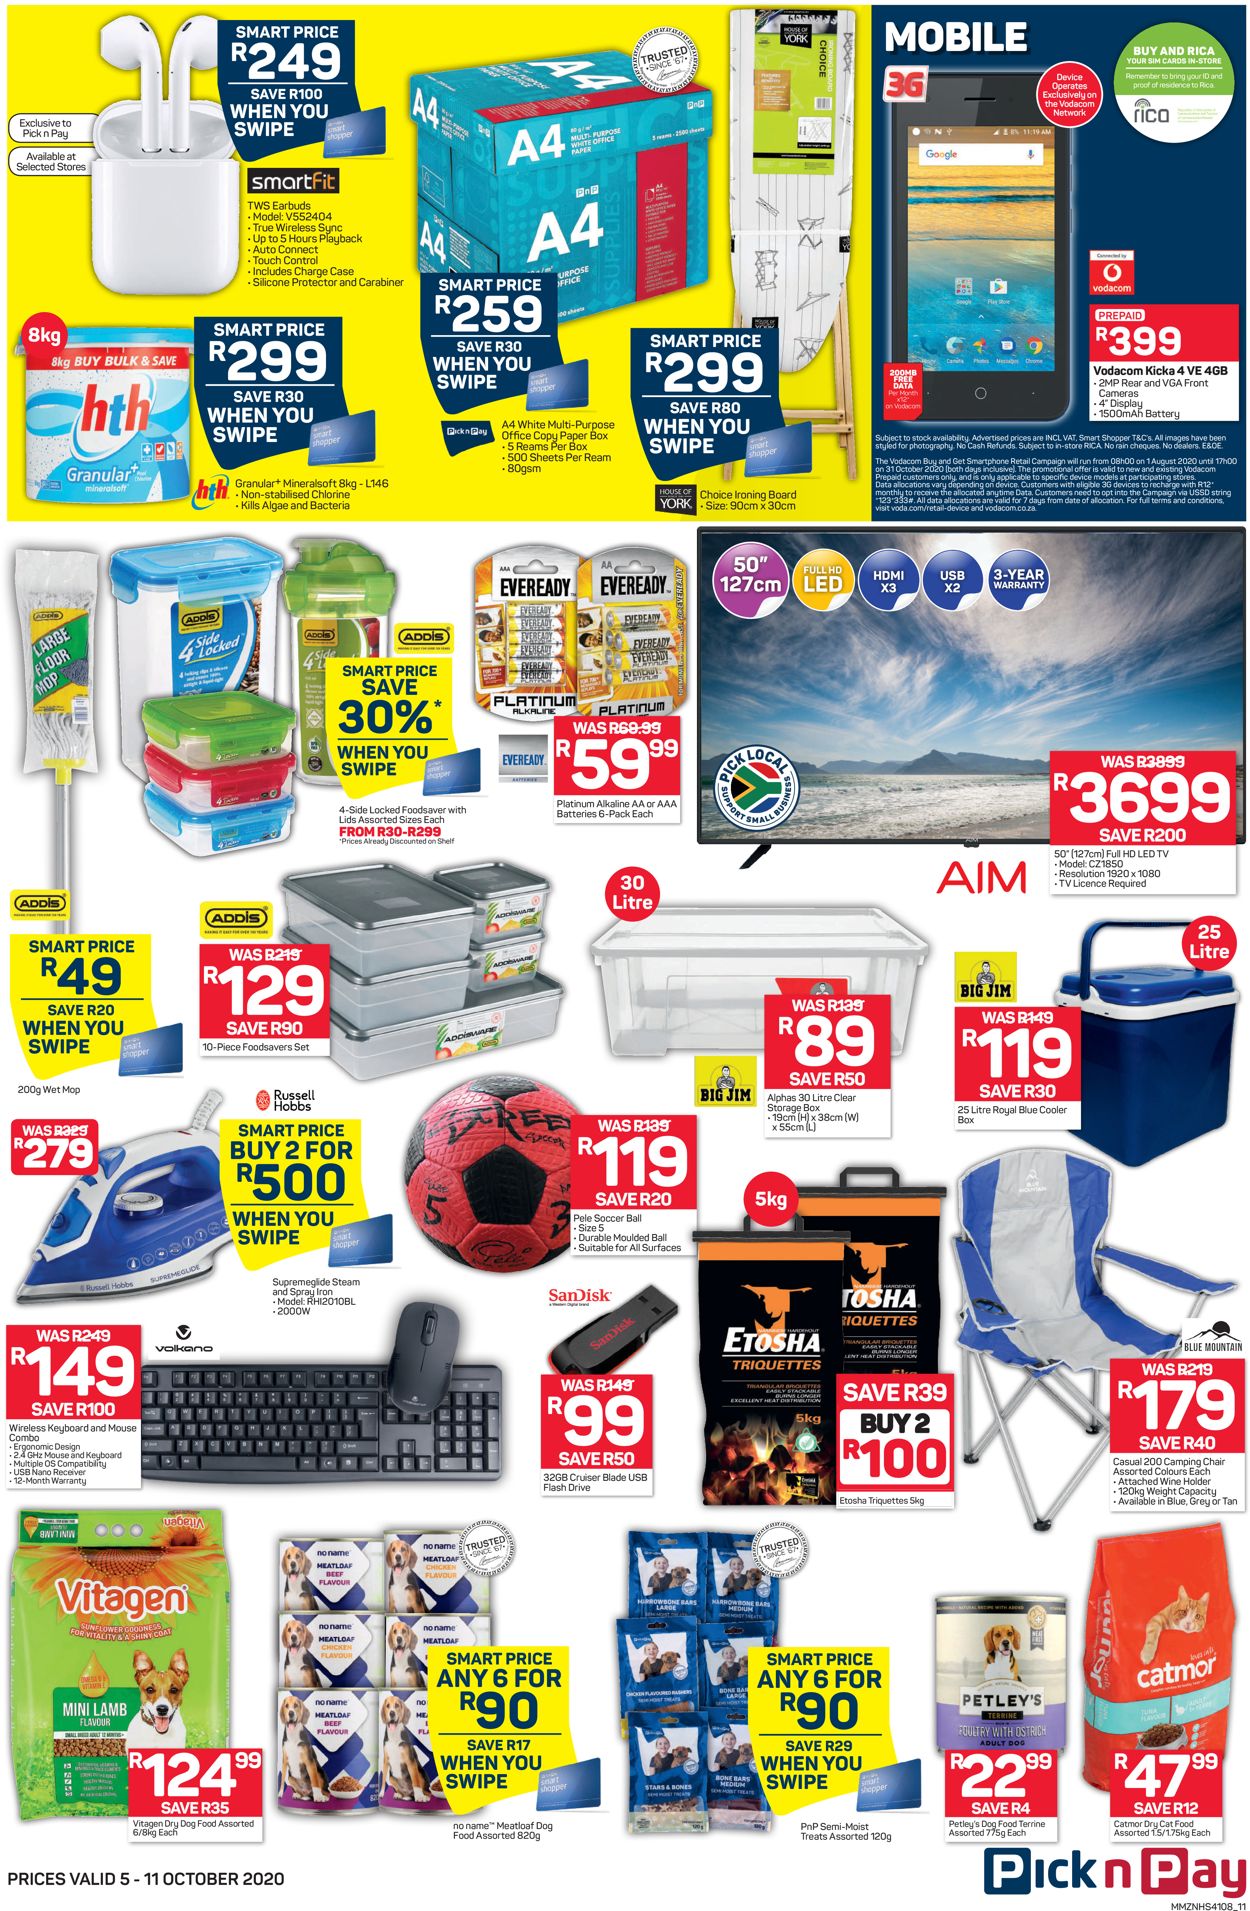 Pick n Pay Catalogue - 2020/10/05-2020/10/11 (Page 11)